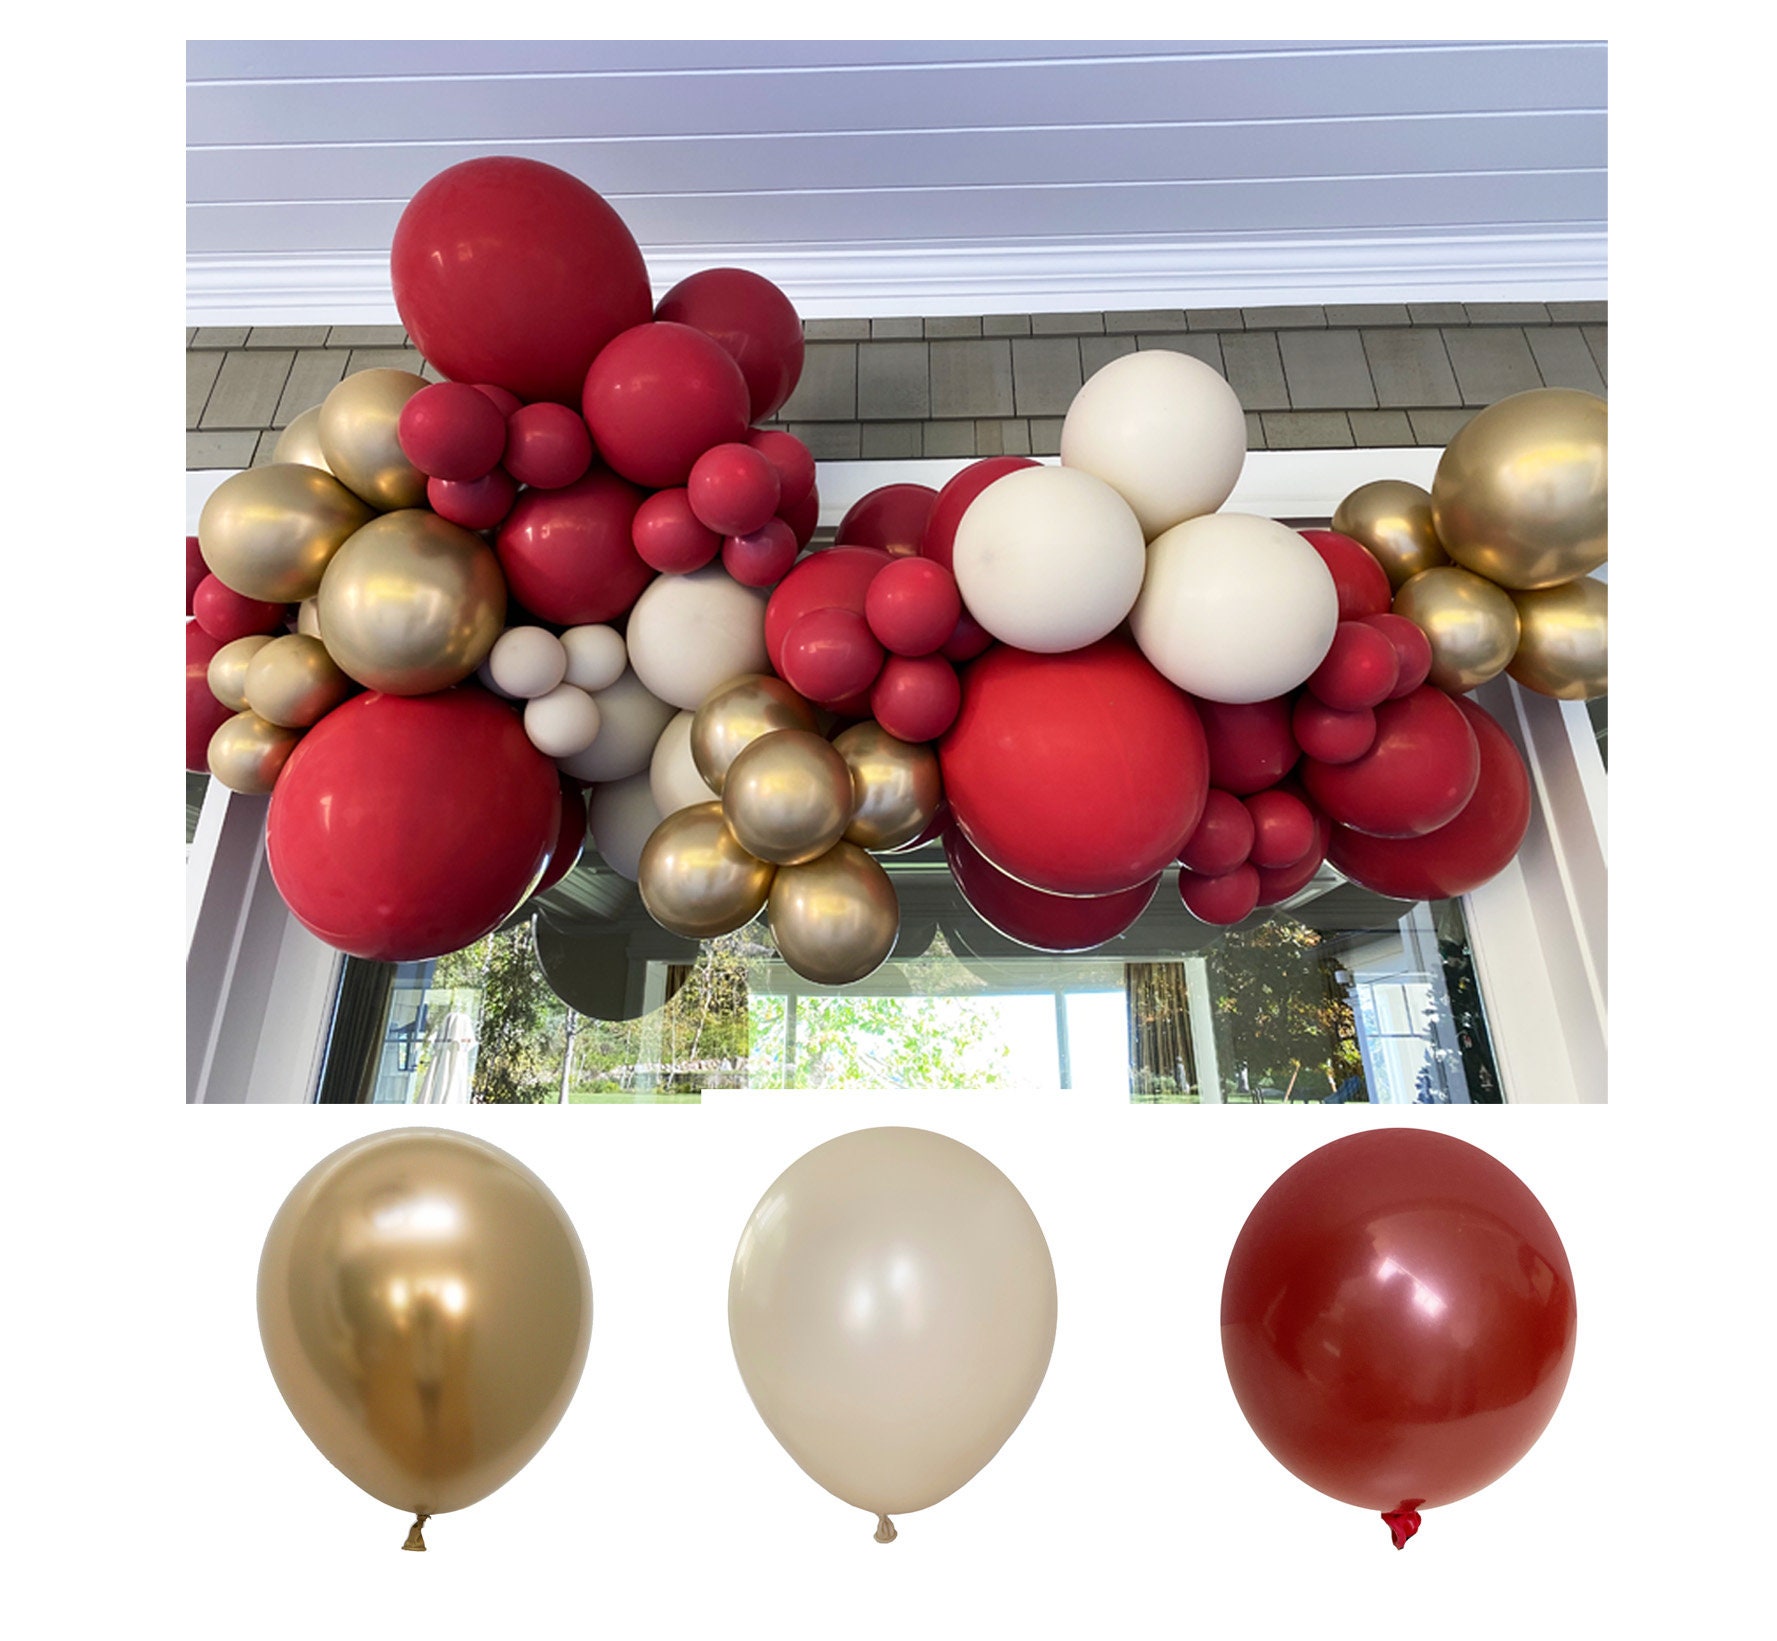 148pcs Matte Red Black Yellow Balloons Garland Arch Racing Car First Birthday  Decorations Party 1st 2nd Kids Baby Shower Two Fast Race Decor 